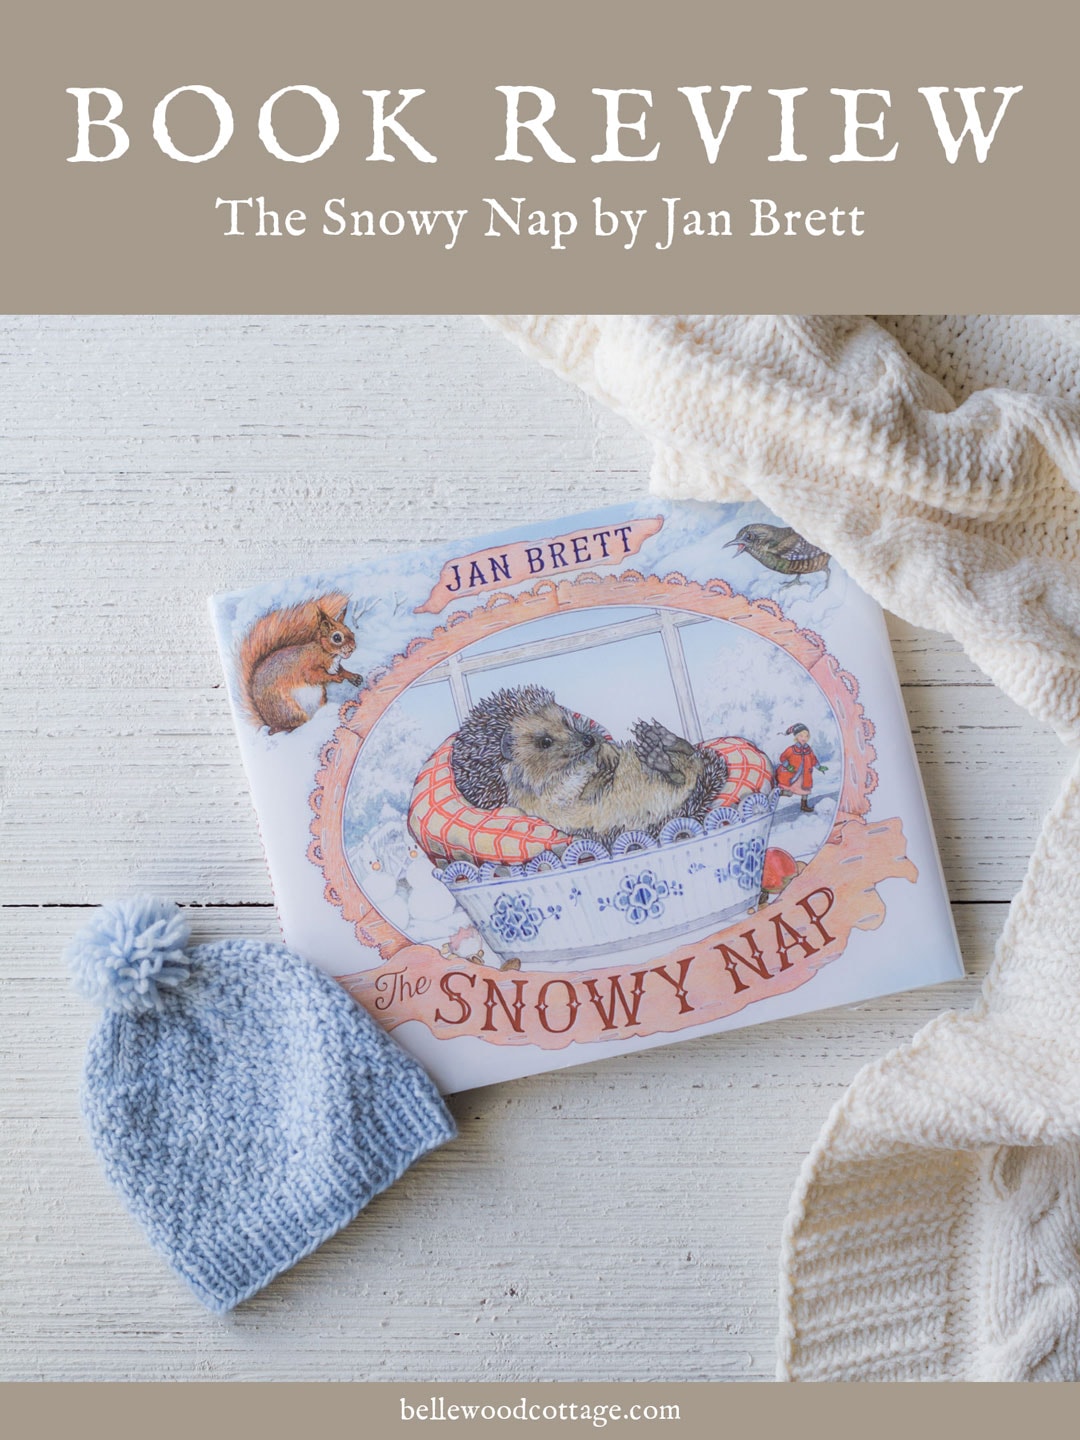 The Snowy Nap book on a wooden surface.